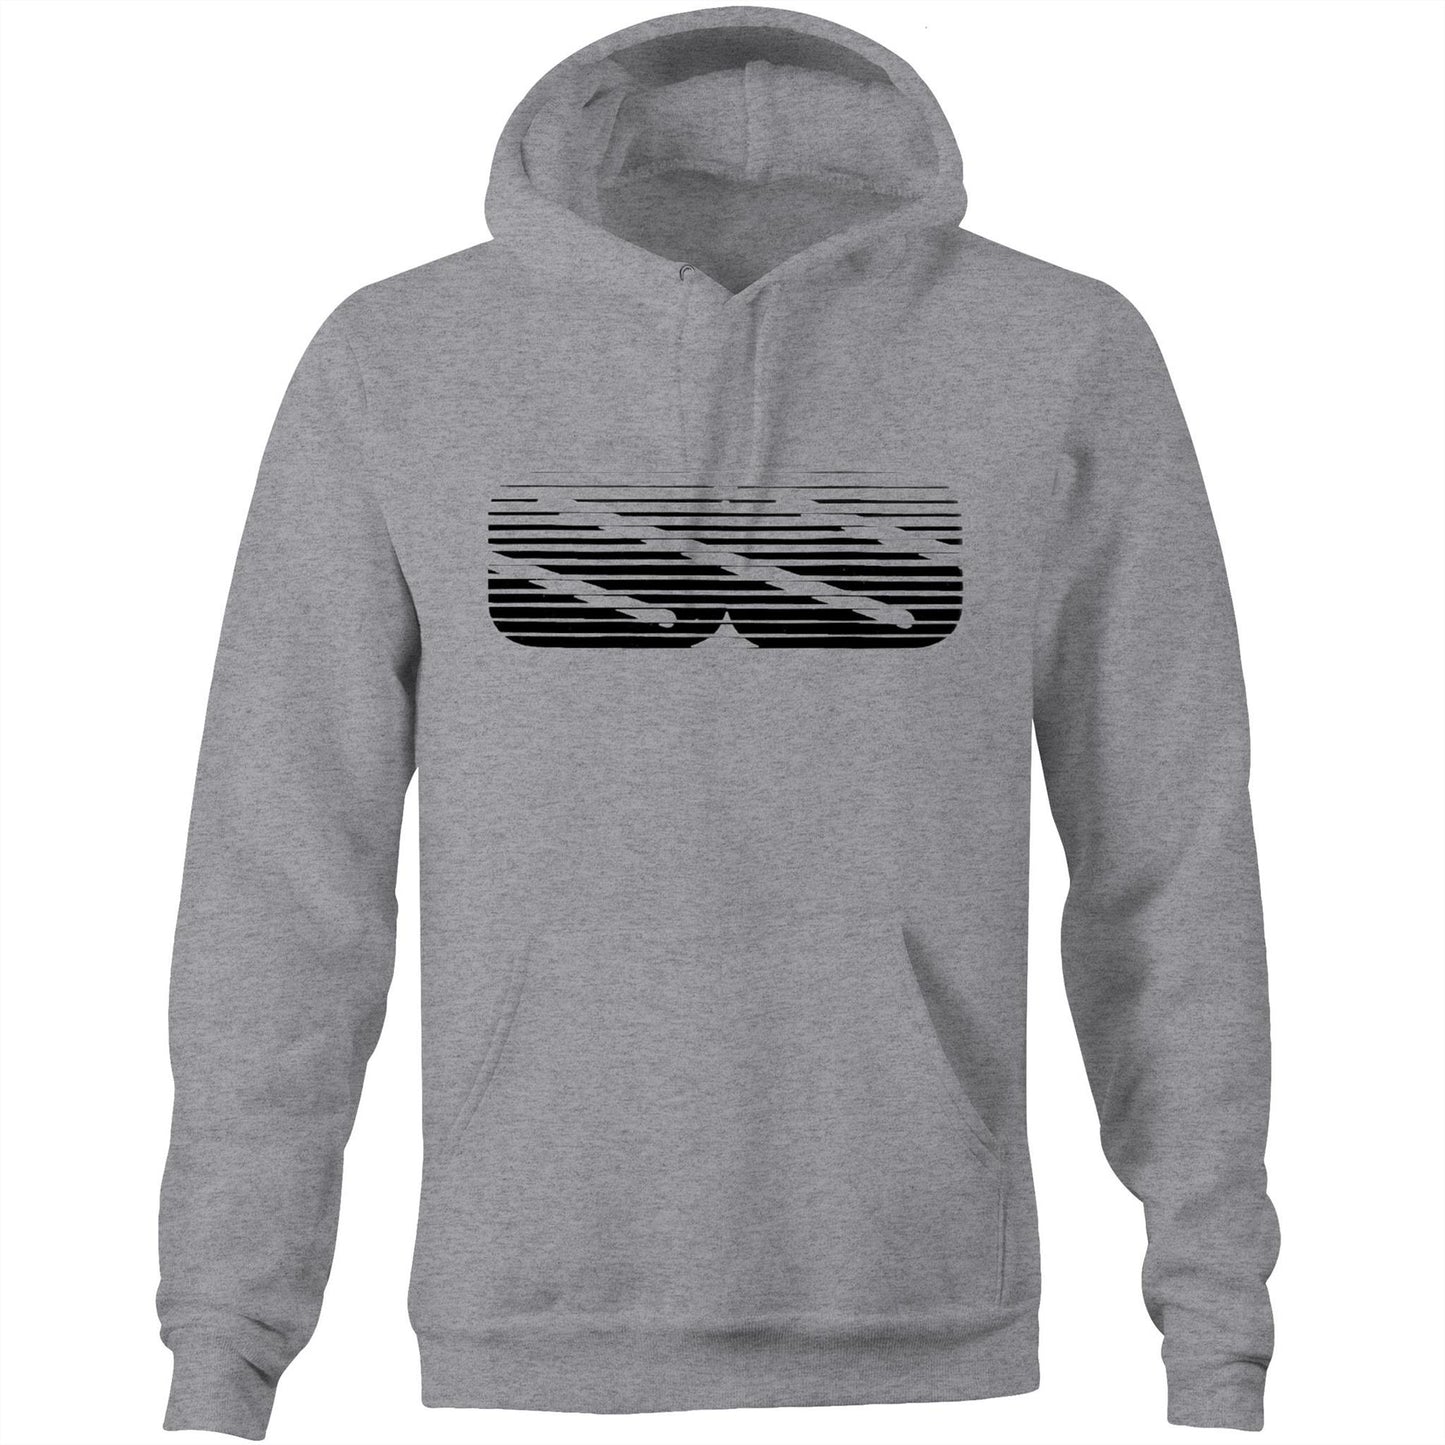 Holden Commodore VK SS Decal - Pocket Hoodie Jumper - Shed Shirts